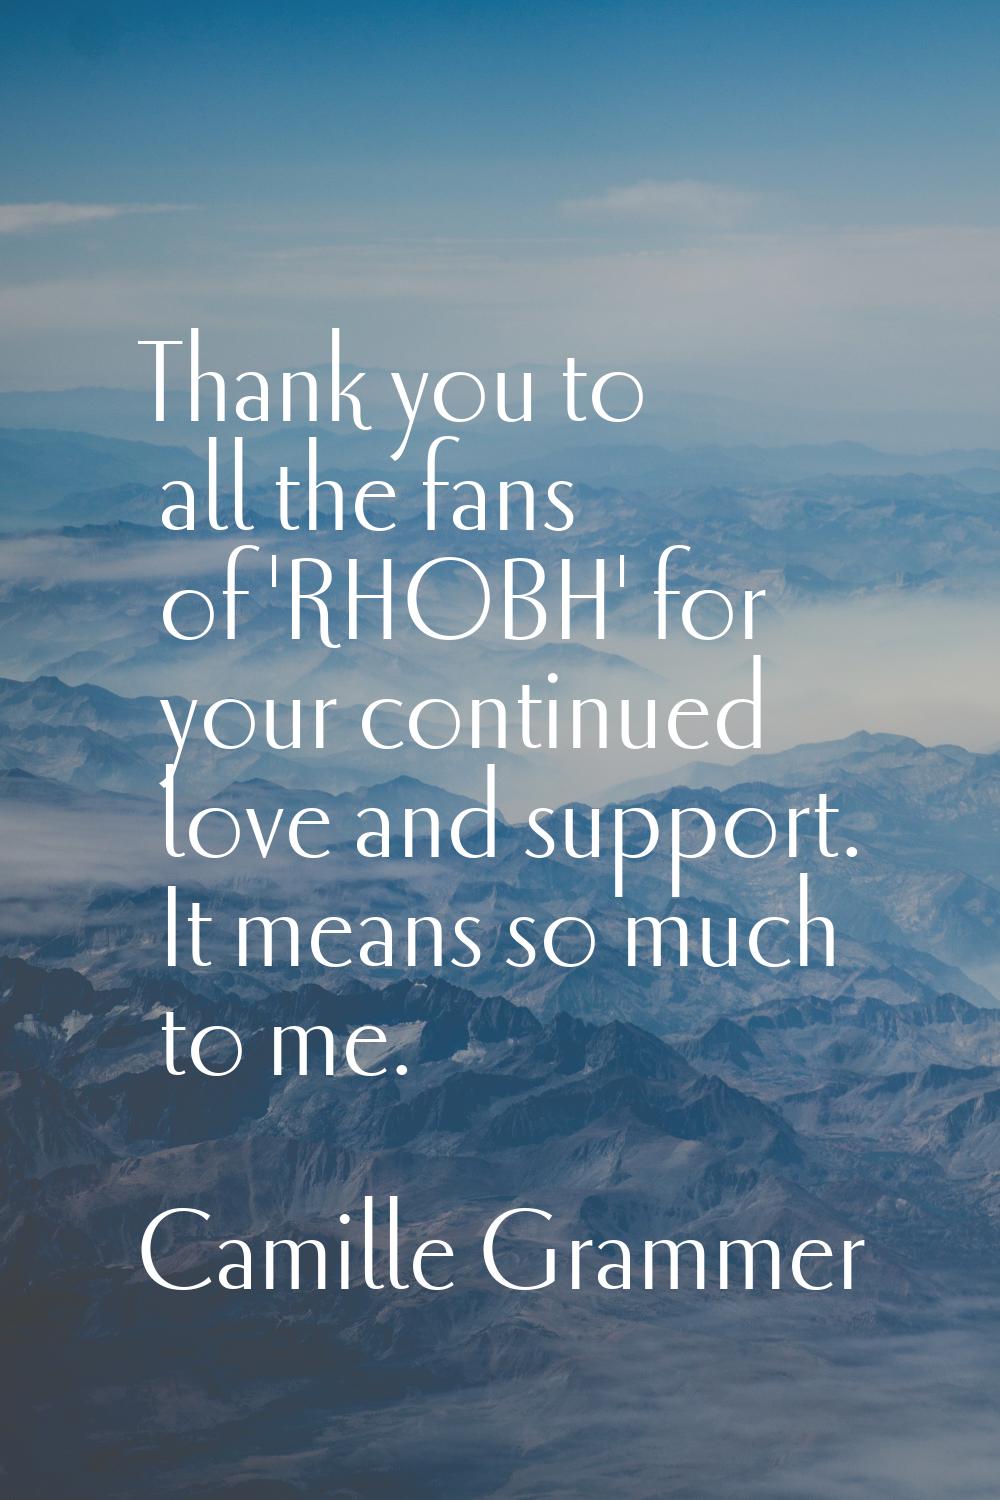 Thank you to all the fans of 'RHOBH' for your continued love and support. It means so much to me.